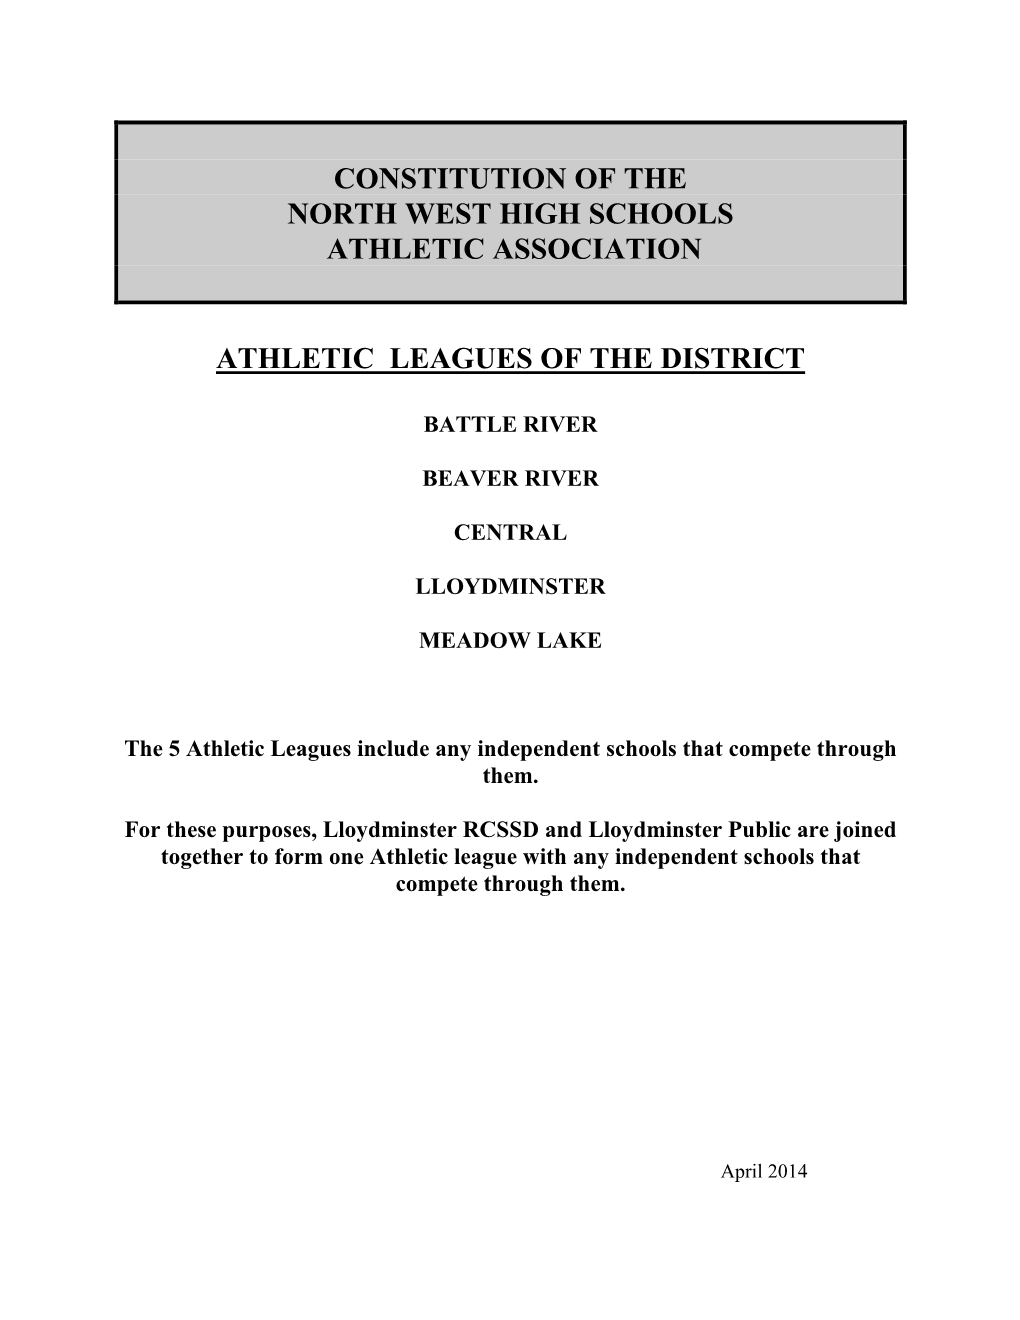 Constitution of the North West High Schools Athletic Association